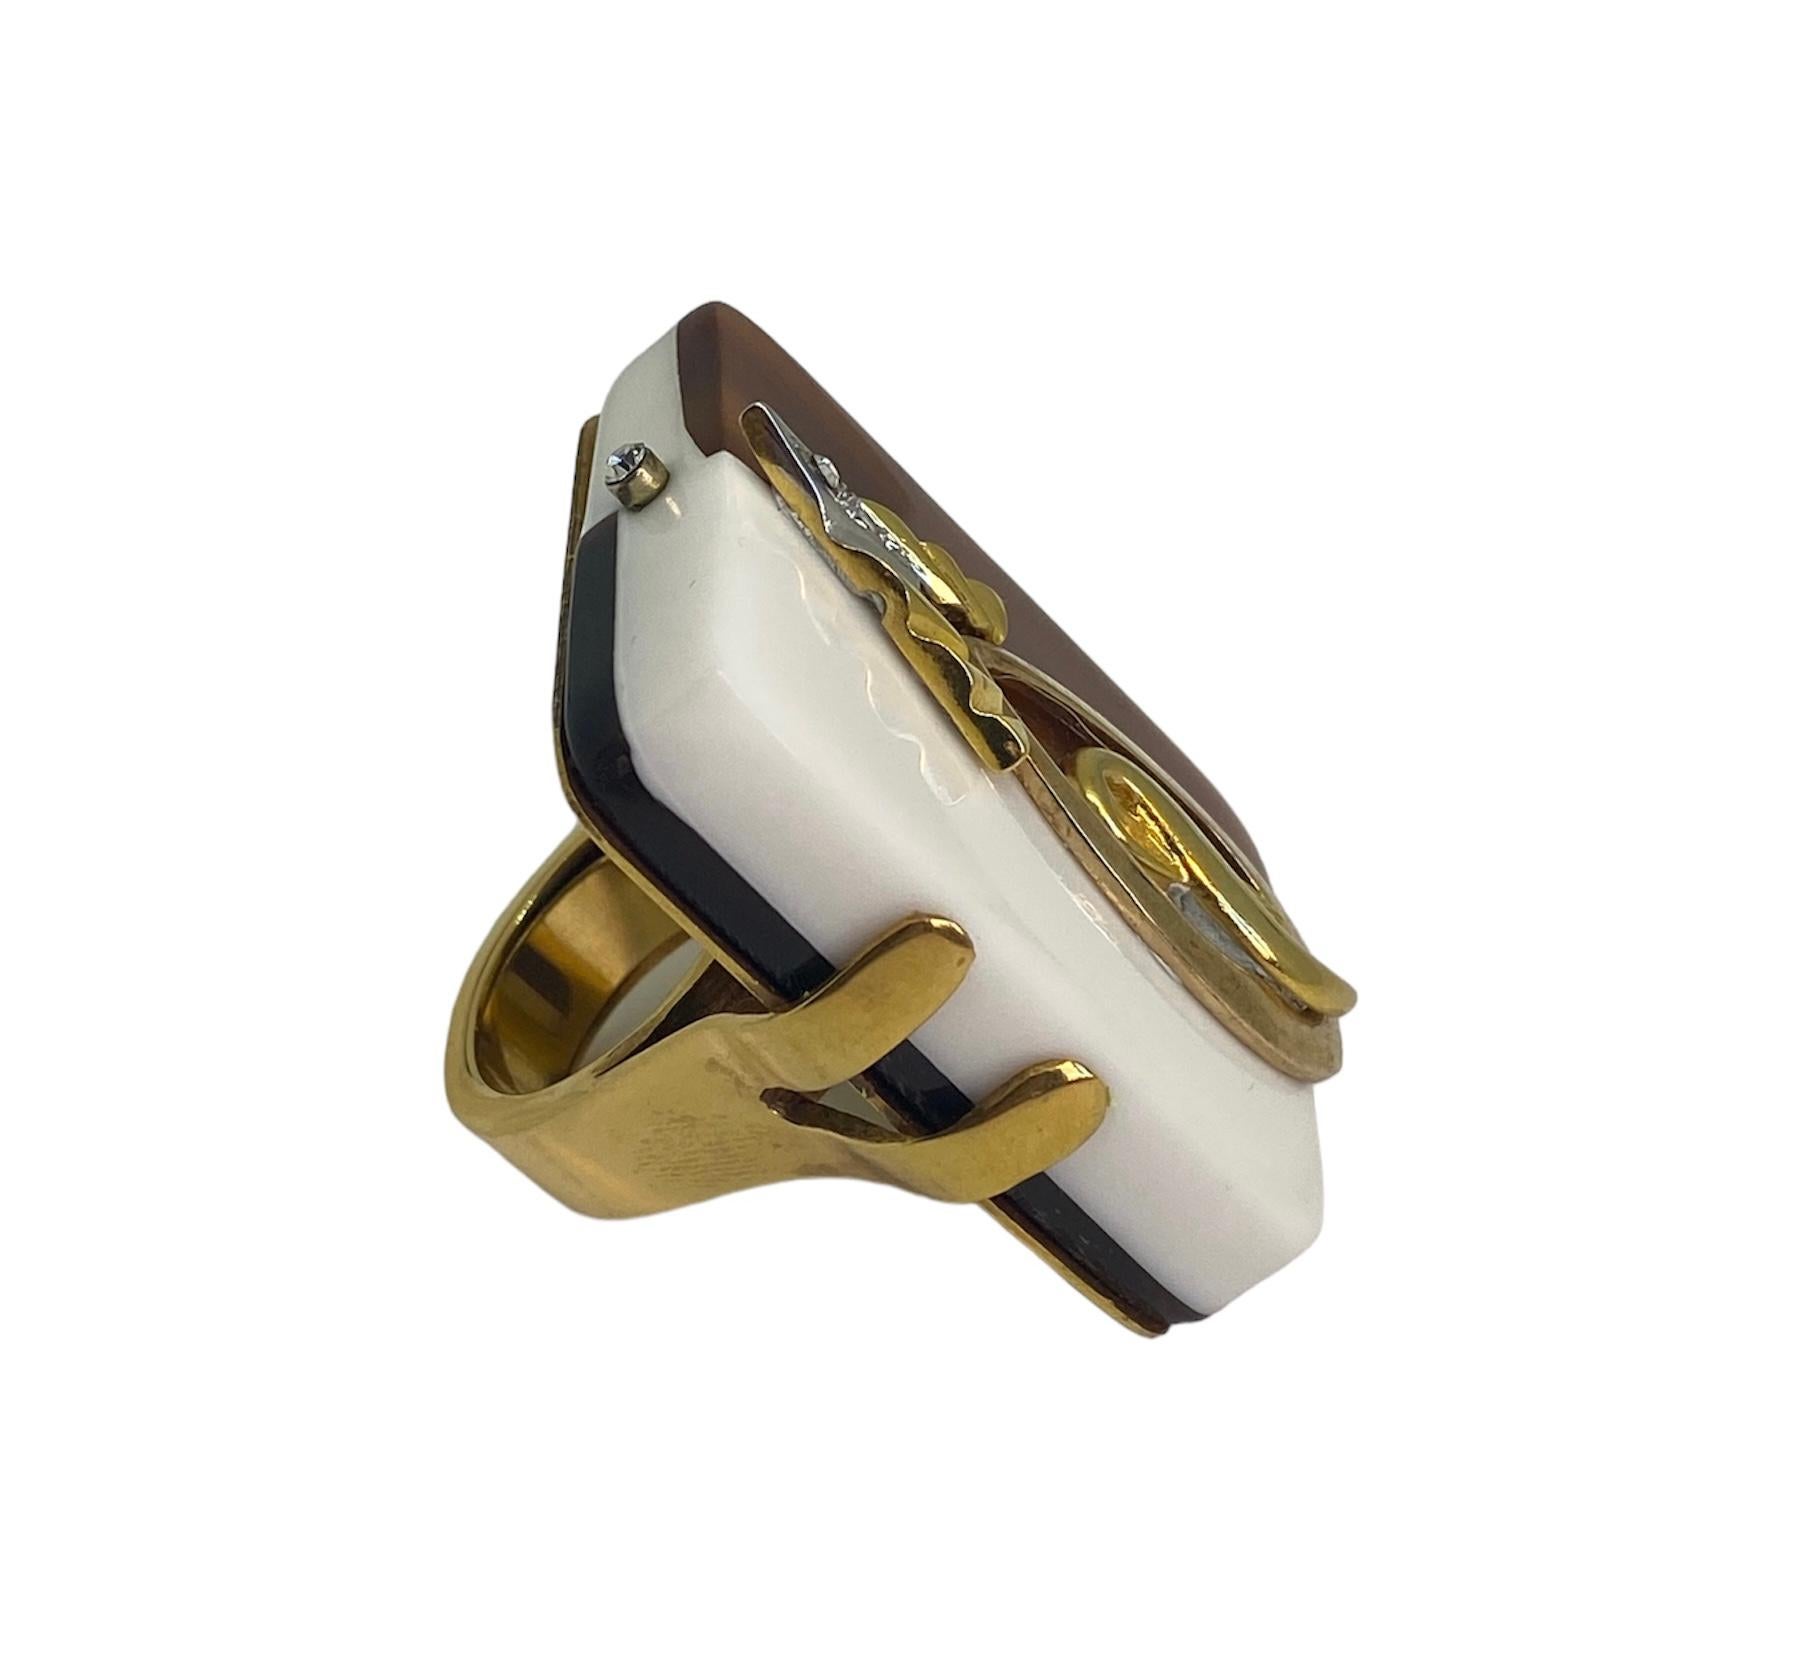 Baguette Cut One Off Ring. High Upcycling. Quartz, Gold Plated Bronze & Vintage Elements. For Sale